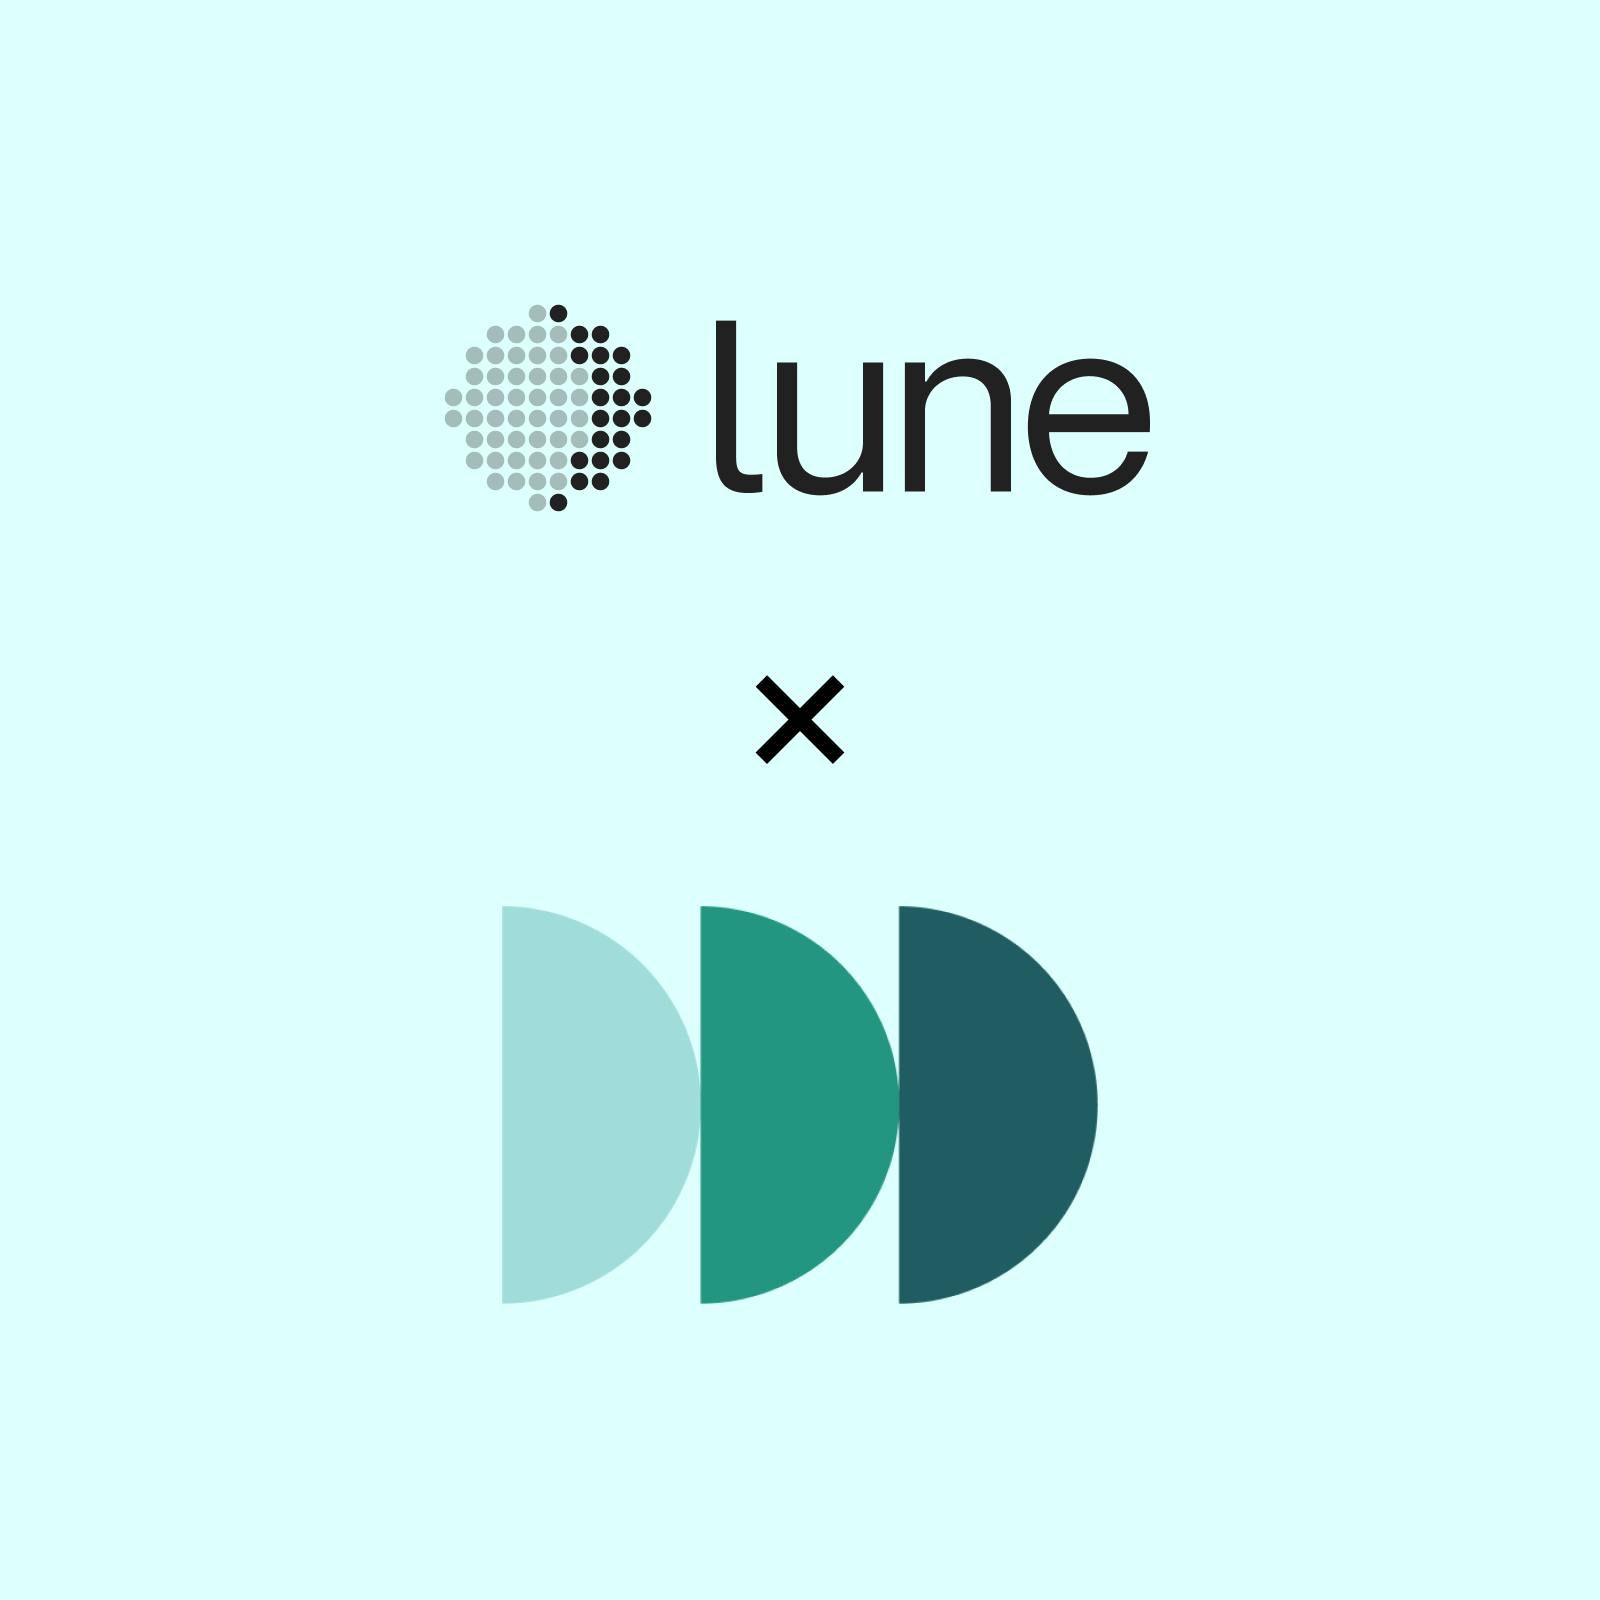 Everything needed to hit your net zero target, all in one place: Greencast partners with Lune